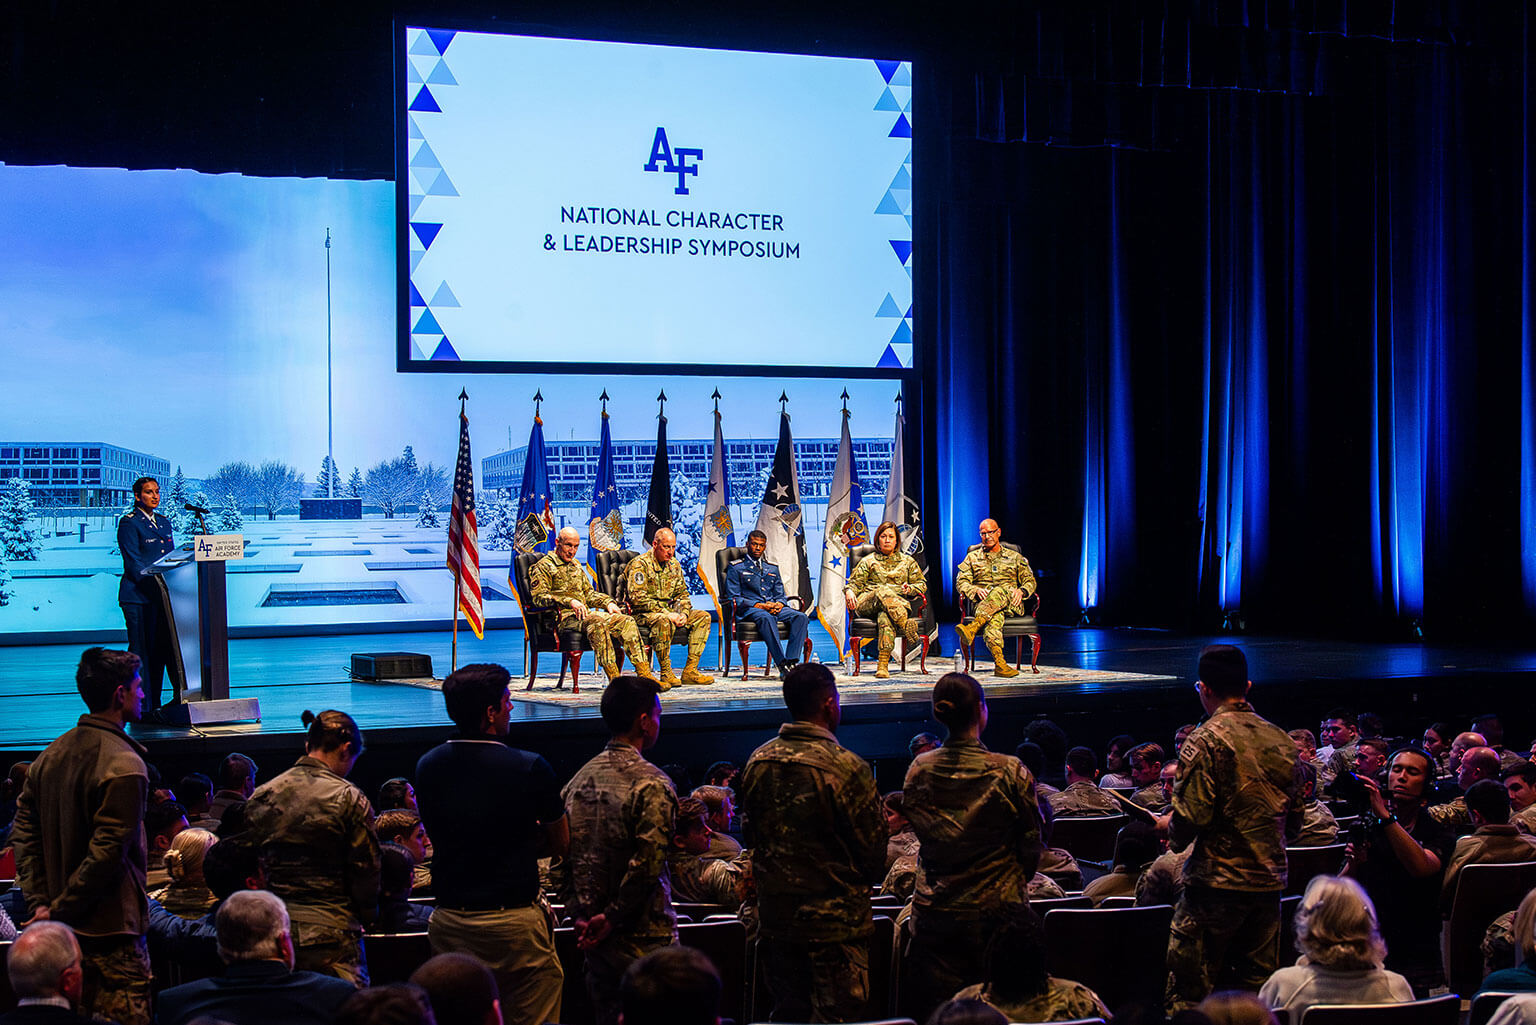 U.S. Air Force and Space Force senior leaders speak to a packed house.